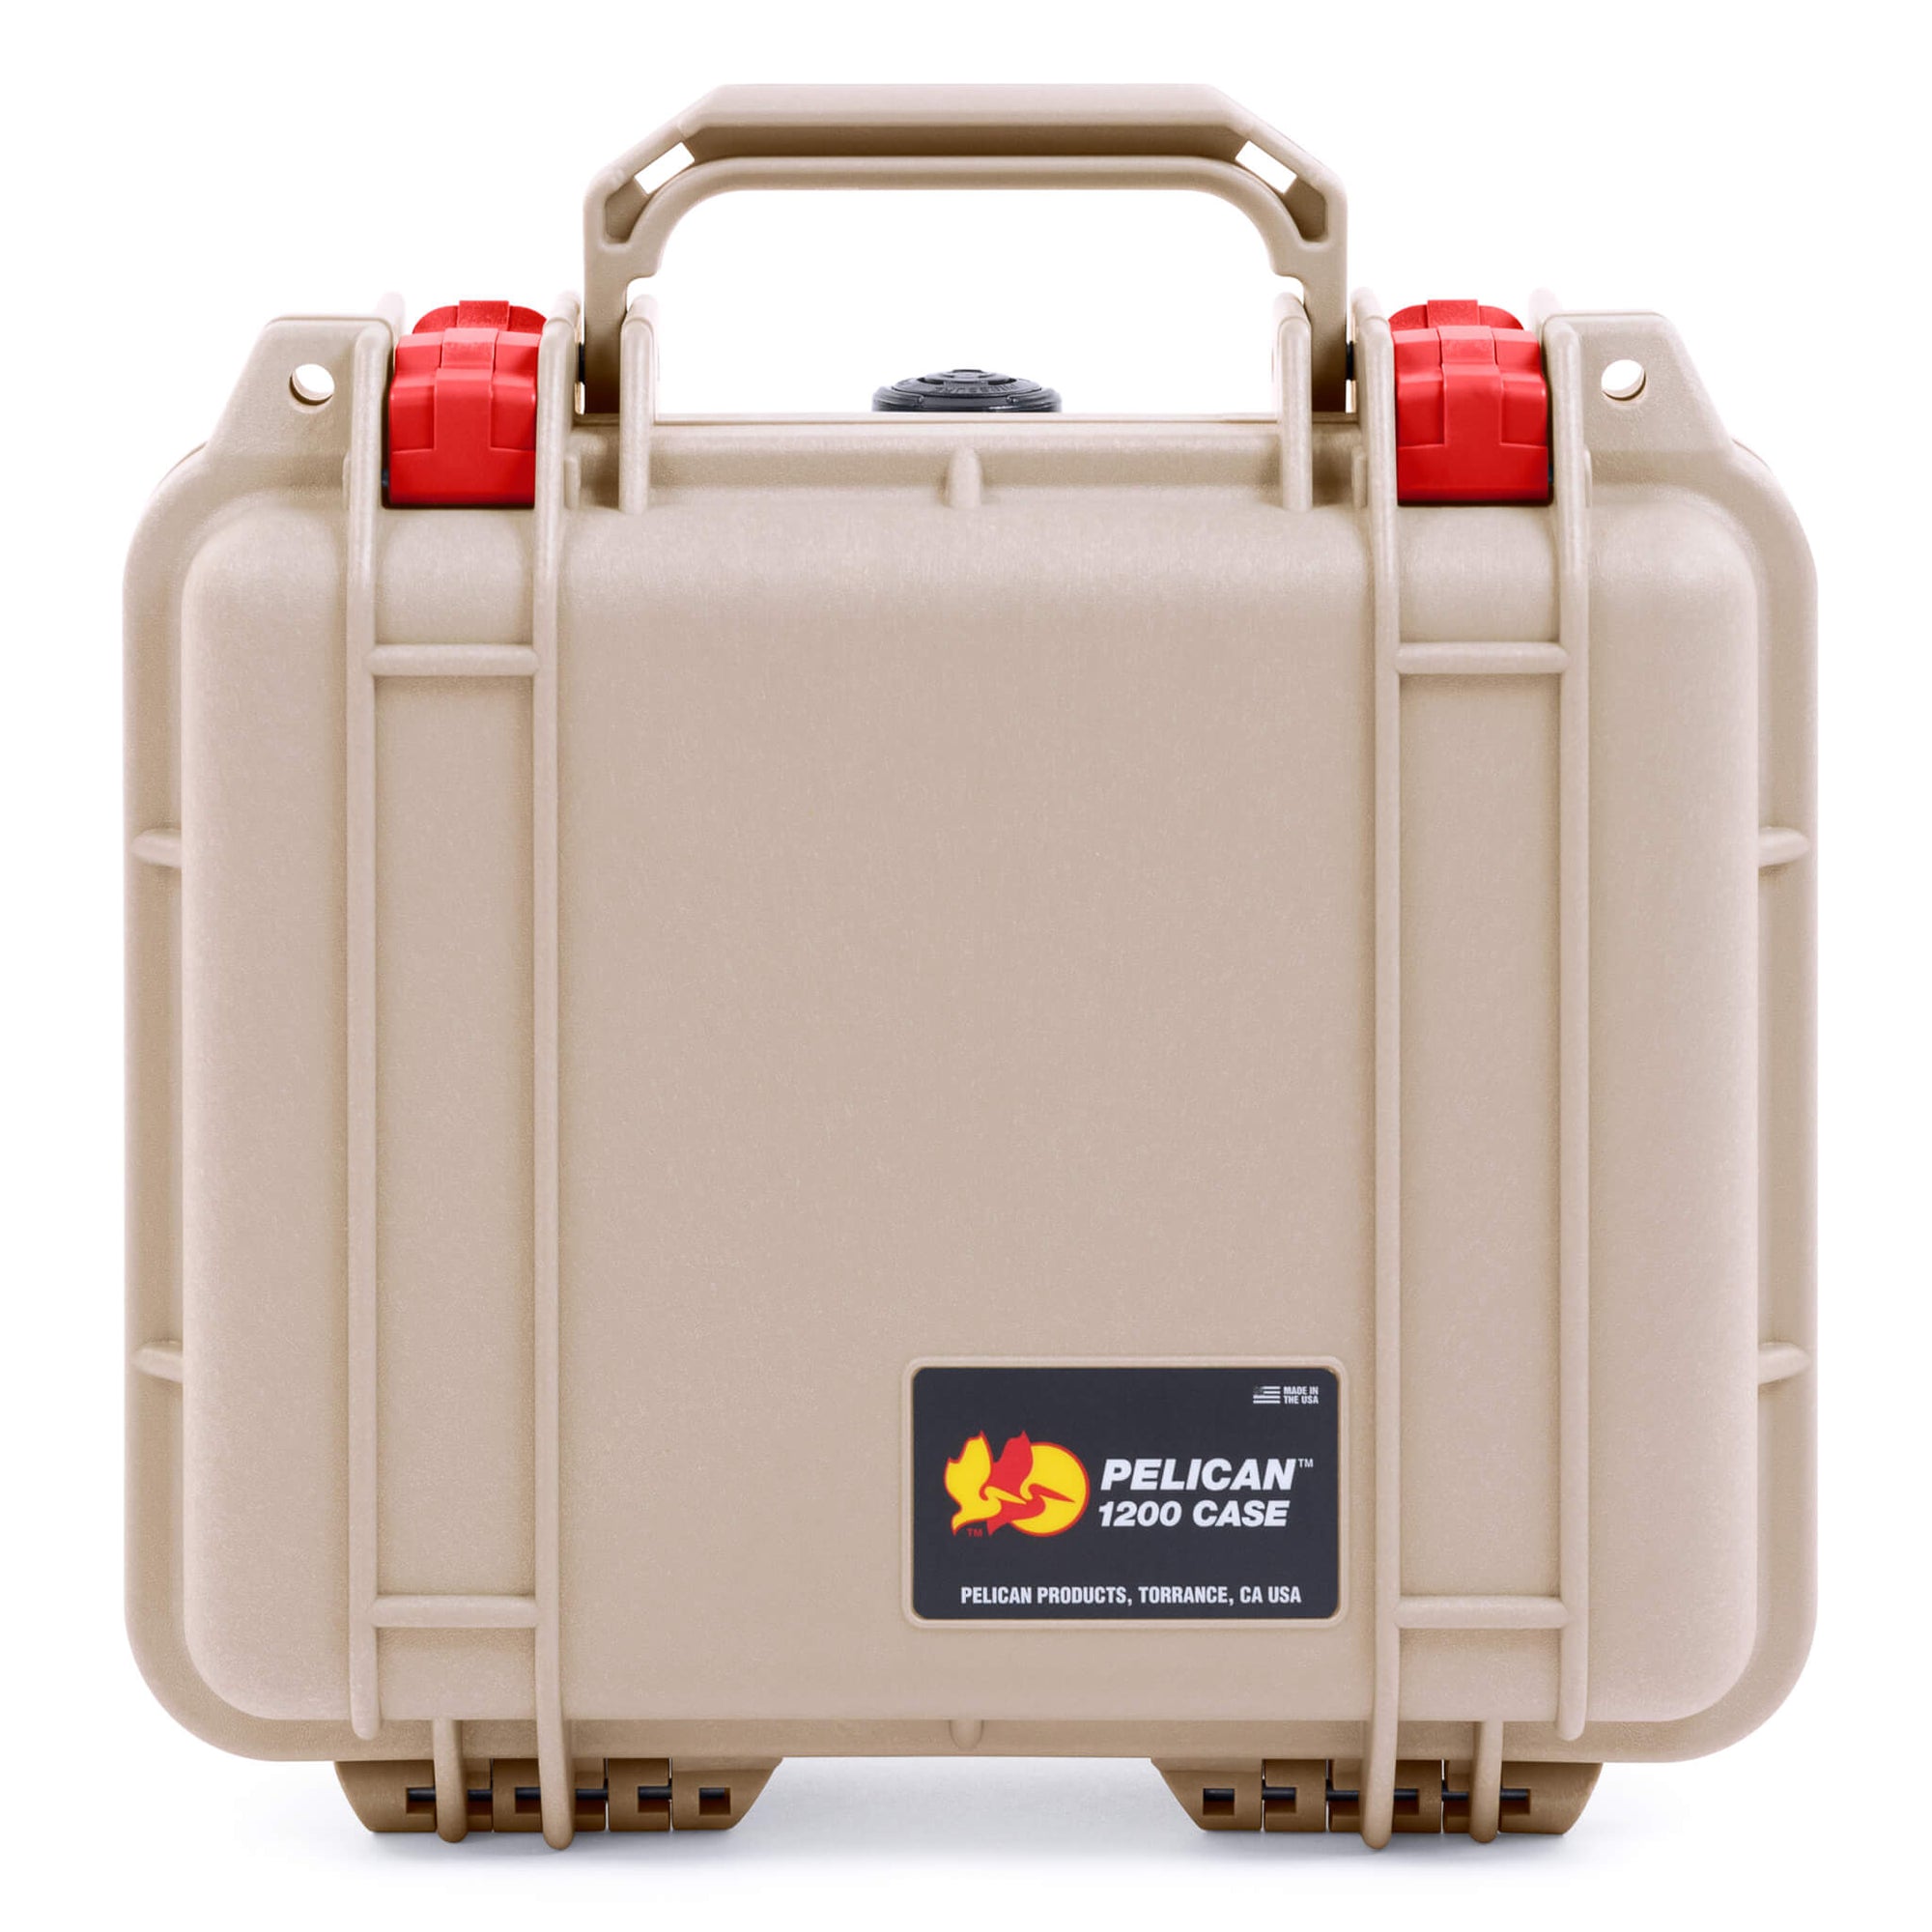 Pelican 1200 Case, Desert Tan with Red Latches ColorCase 